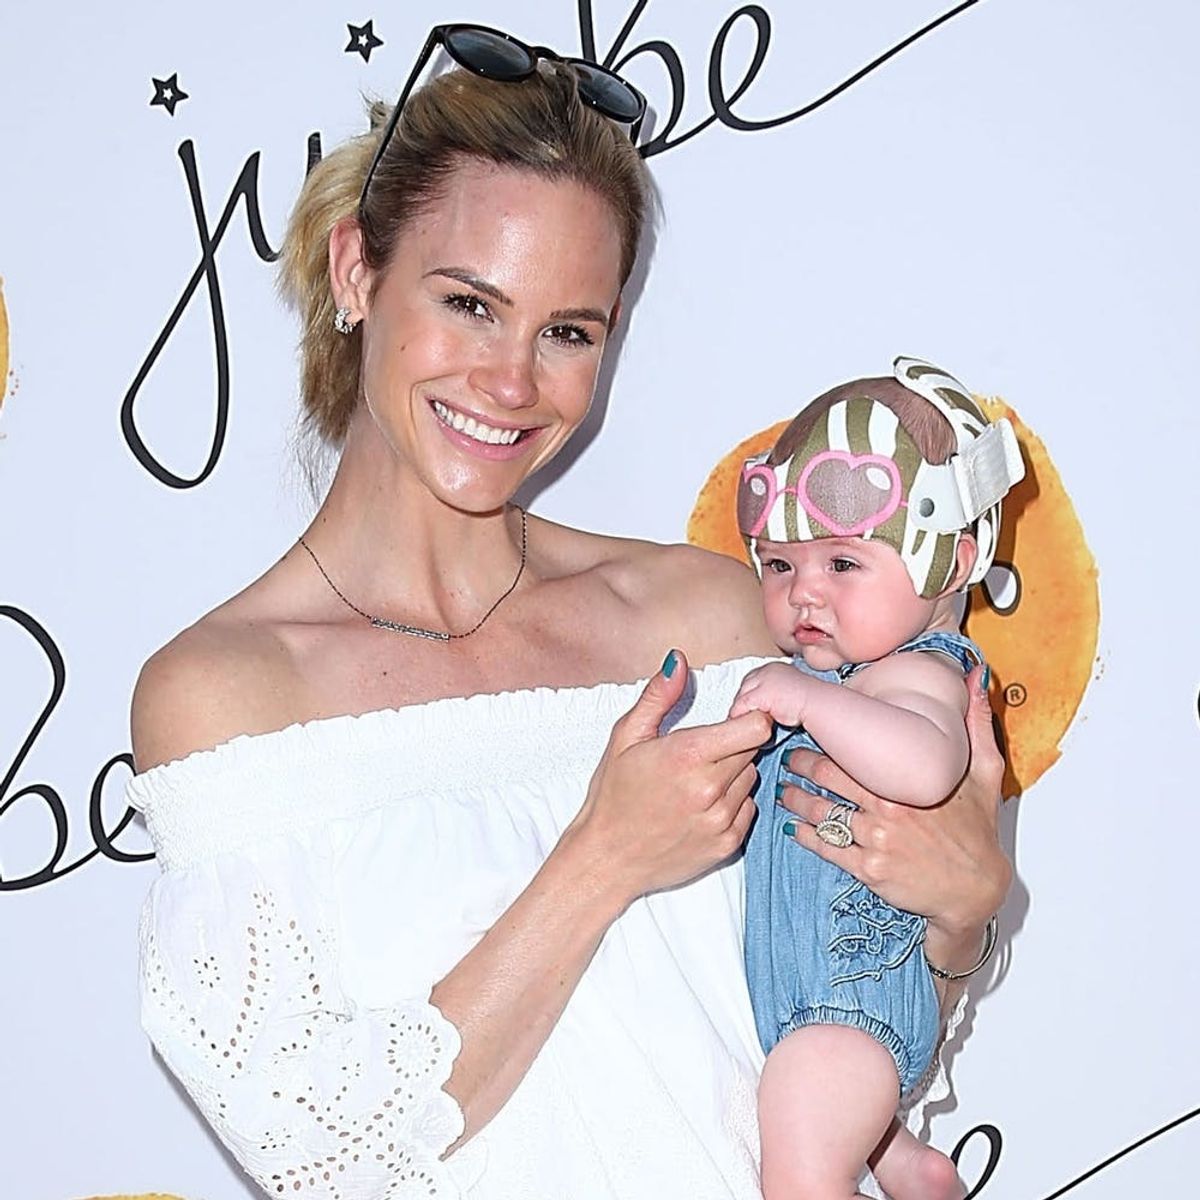 “RHOC” Star Meghan King Edmonds Is Pregnant With Baby #2